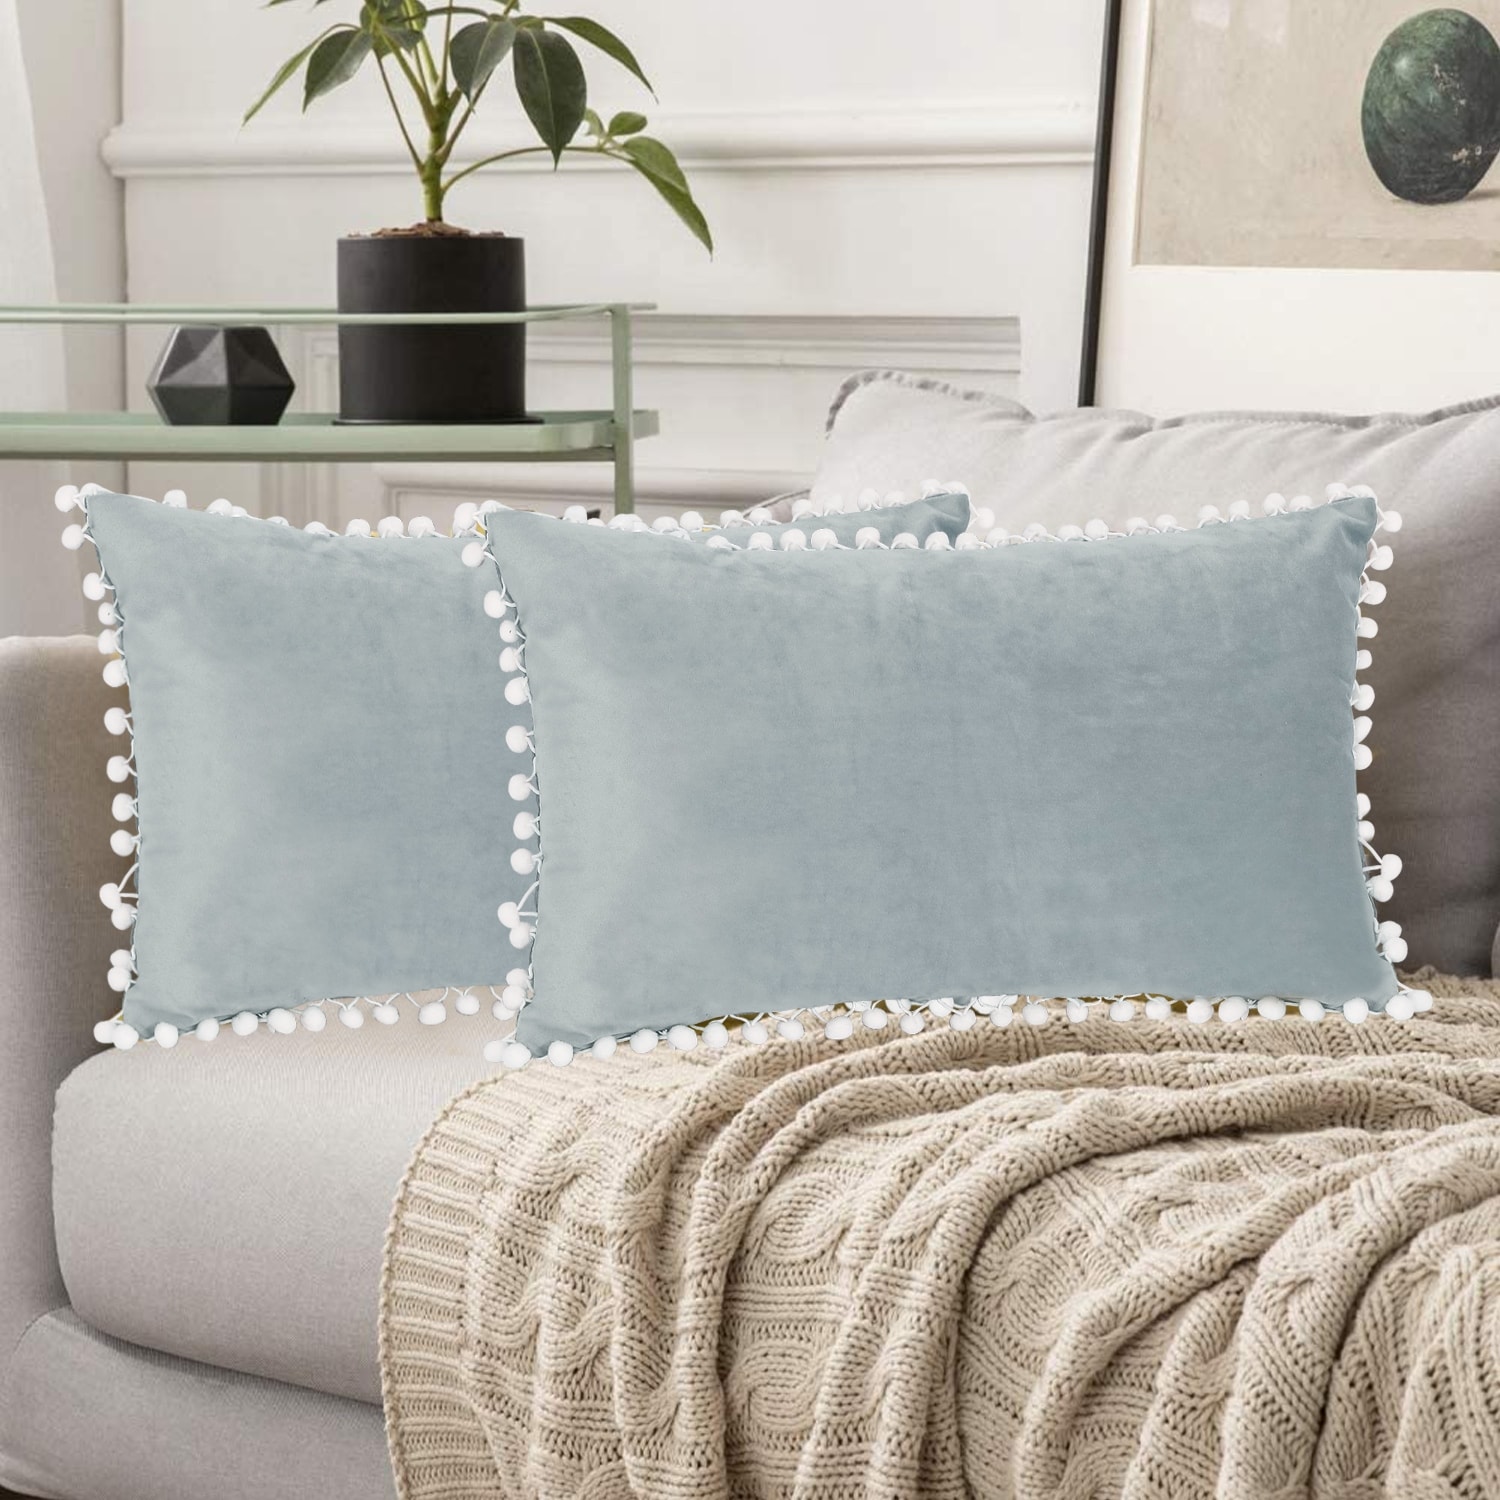 https://ak1.ostkcdn.com/images/products/is/images/direct/8ba2988e6686a5412f52770e4a79416bfae27583/Adeco-Pack-of-2-Decorative-Throw-Pillow-Covers-with-Pom-Poms.jpg